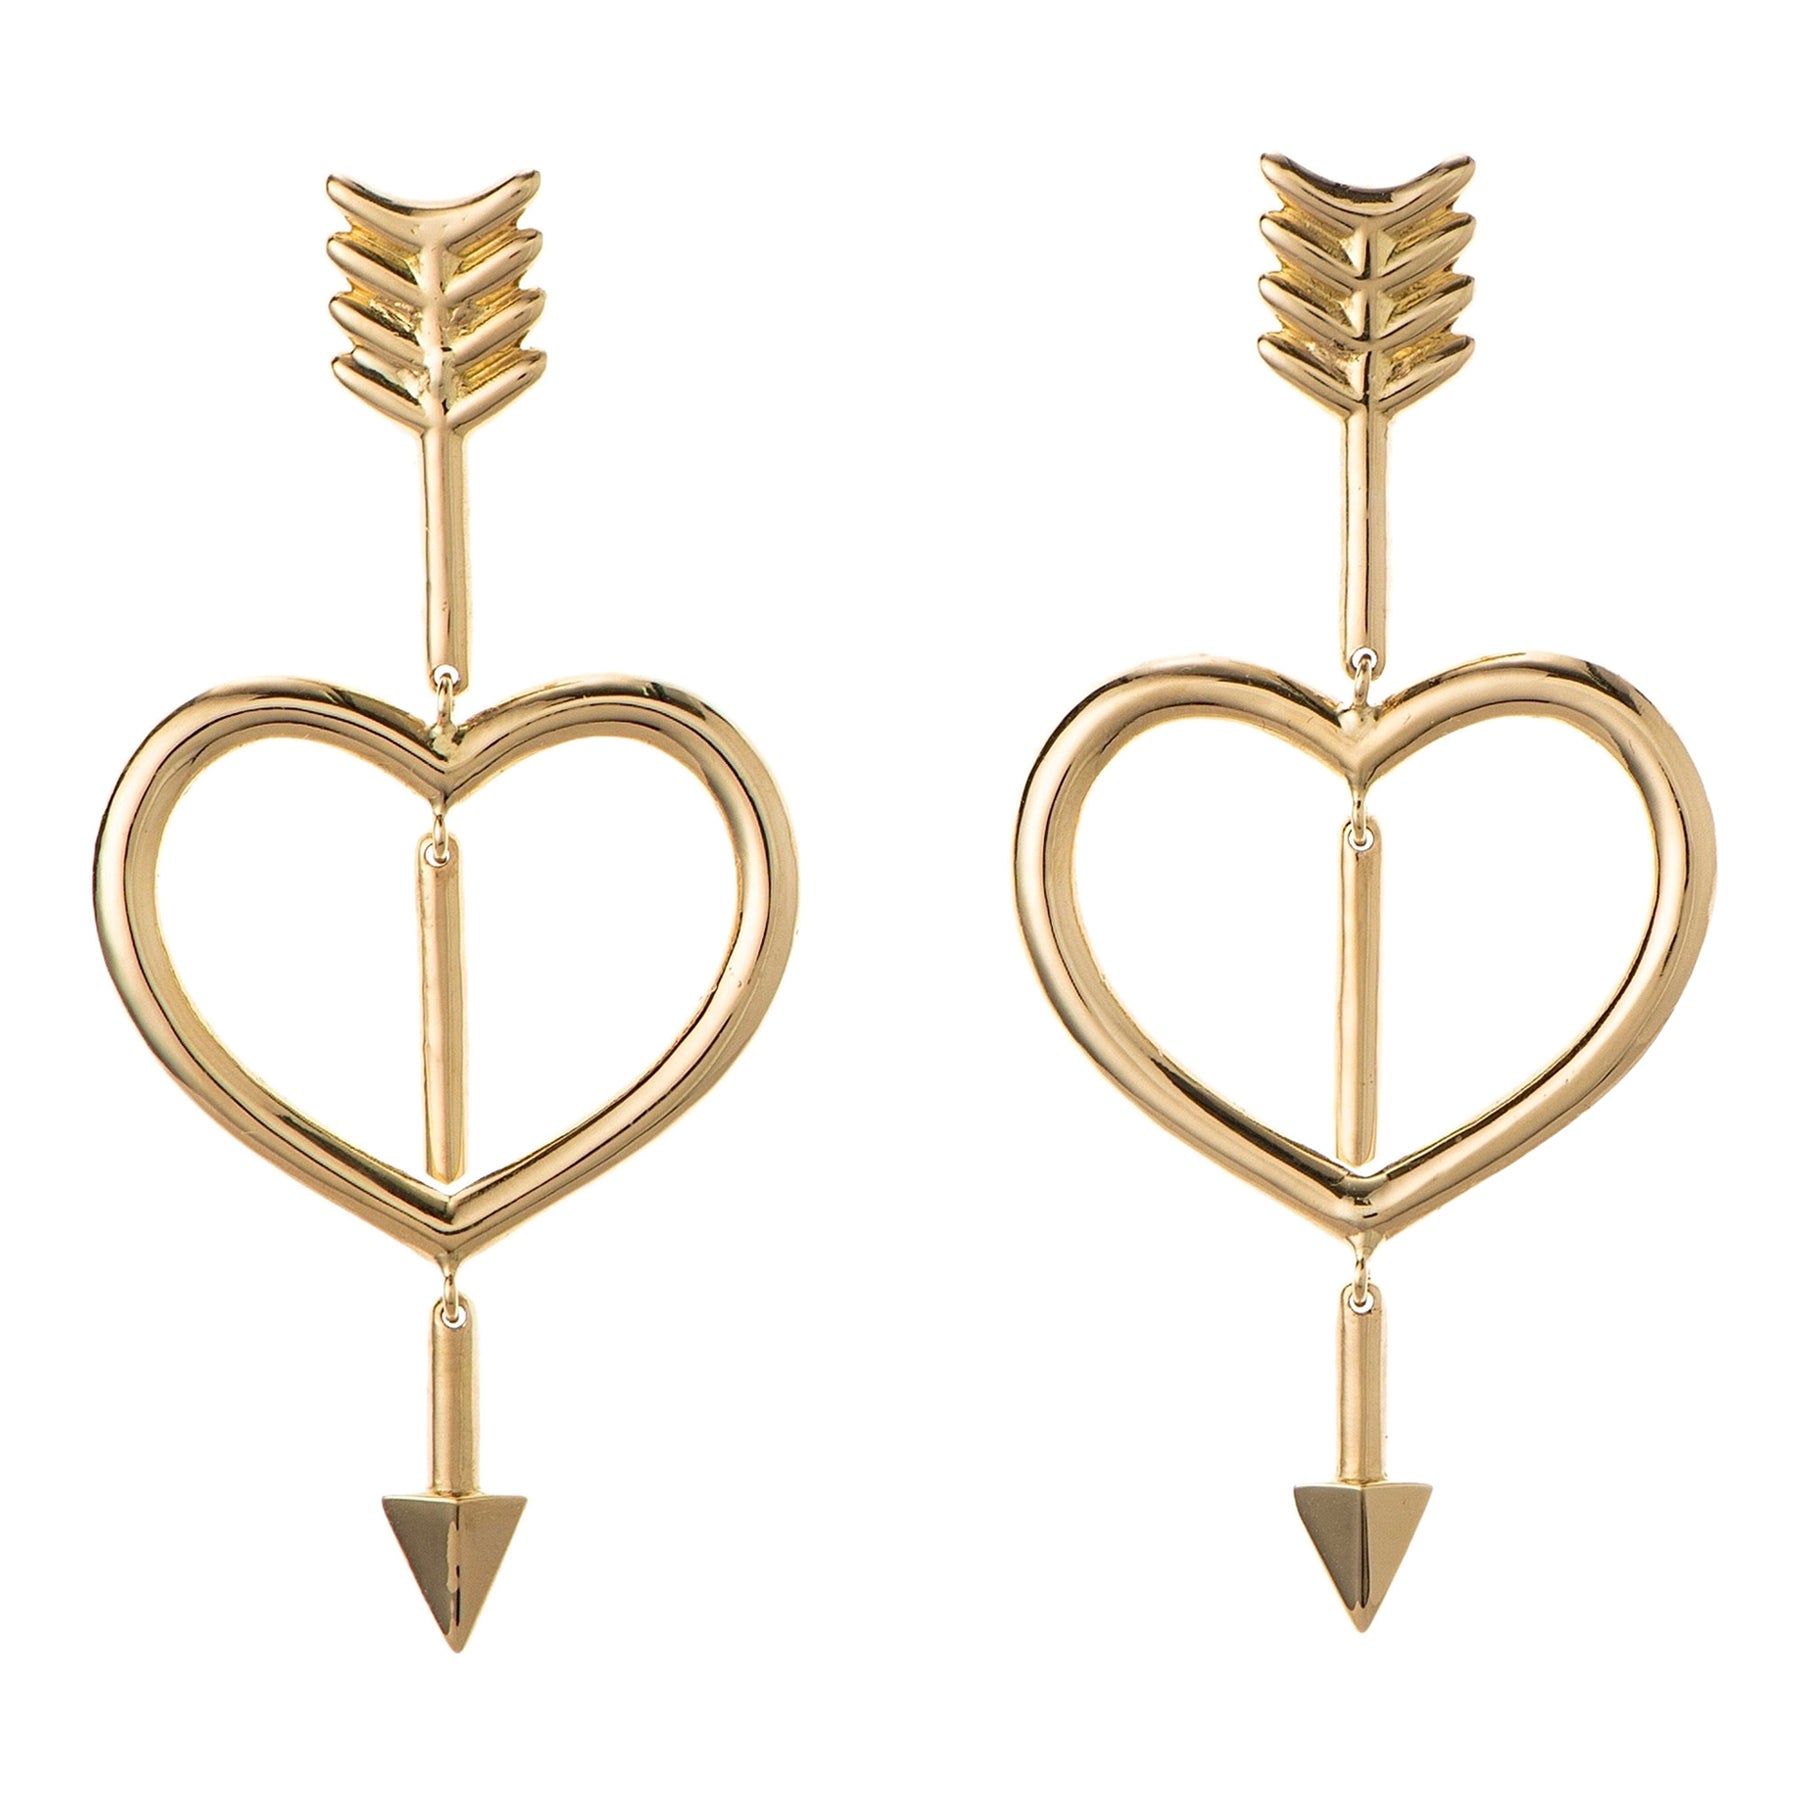 Maria Kotsoni- Contemporary Articulated 18K Yellow Gold Heart & Arrow Earrings For Sale